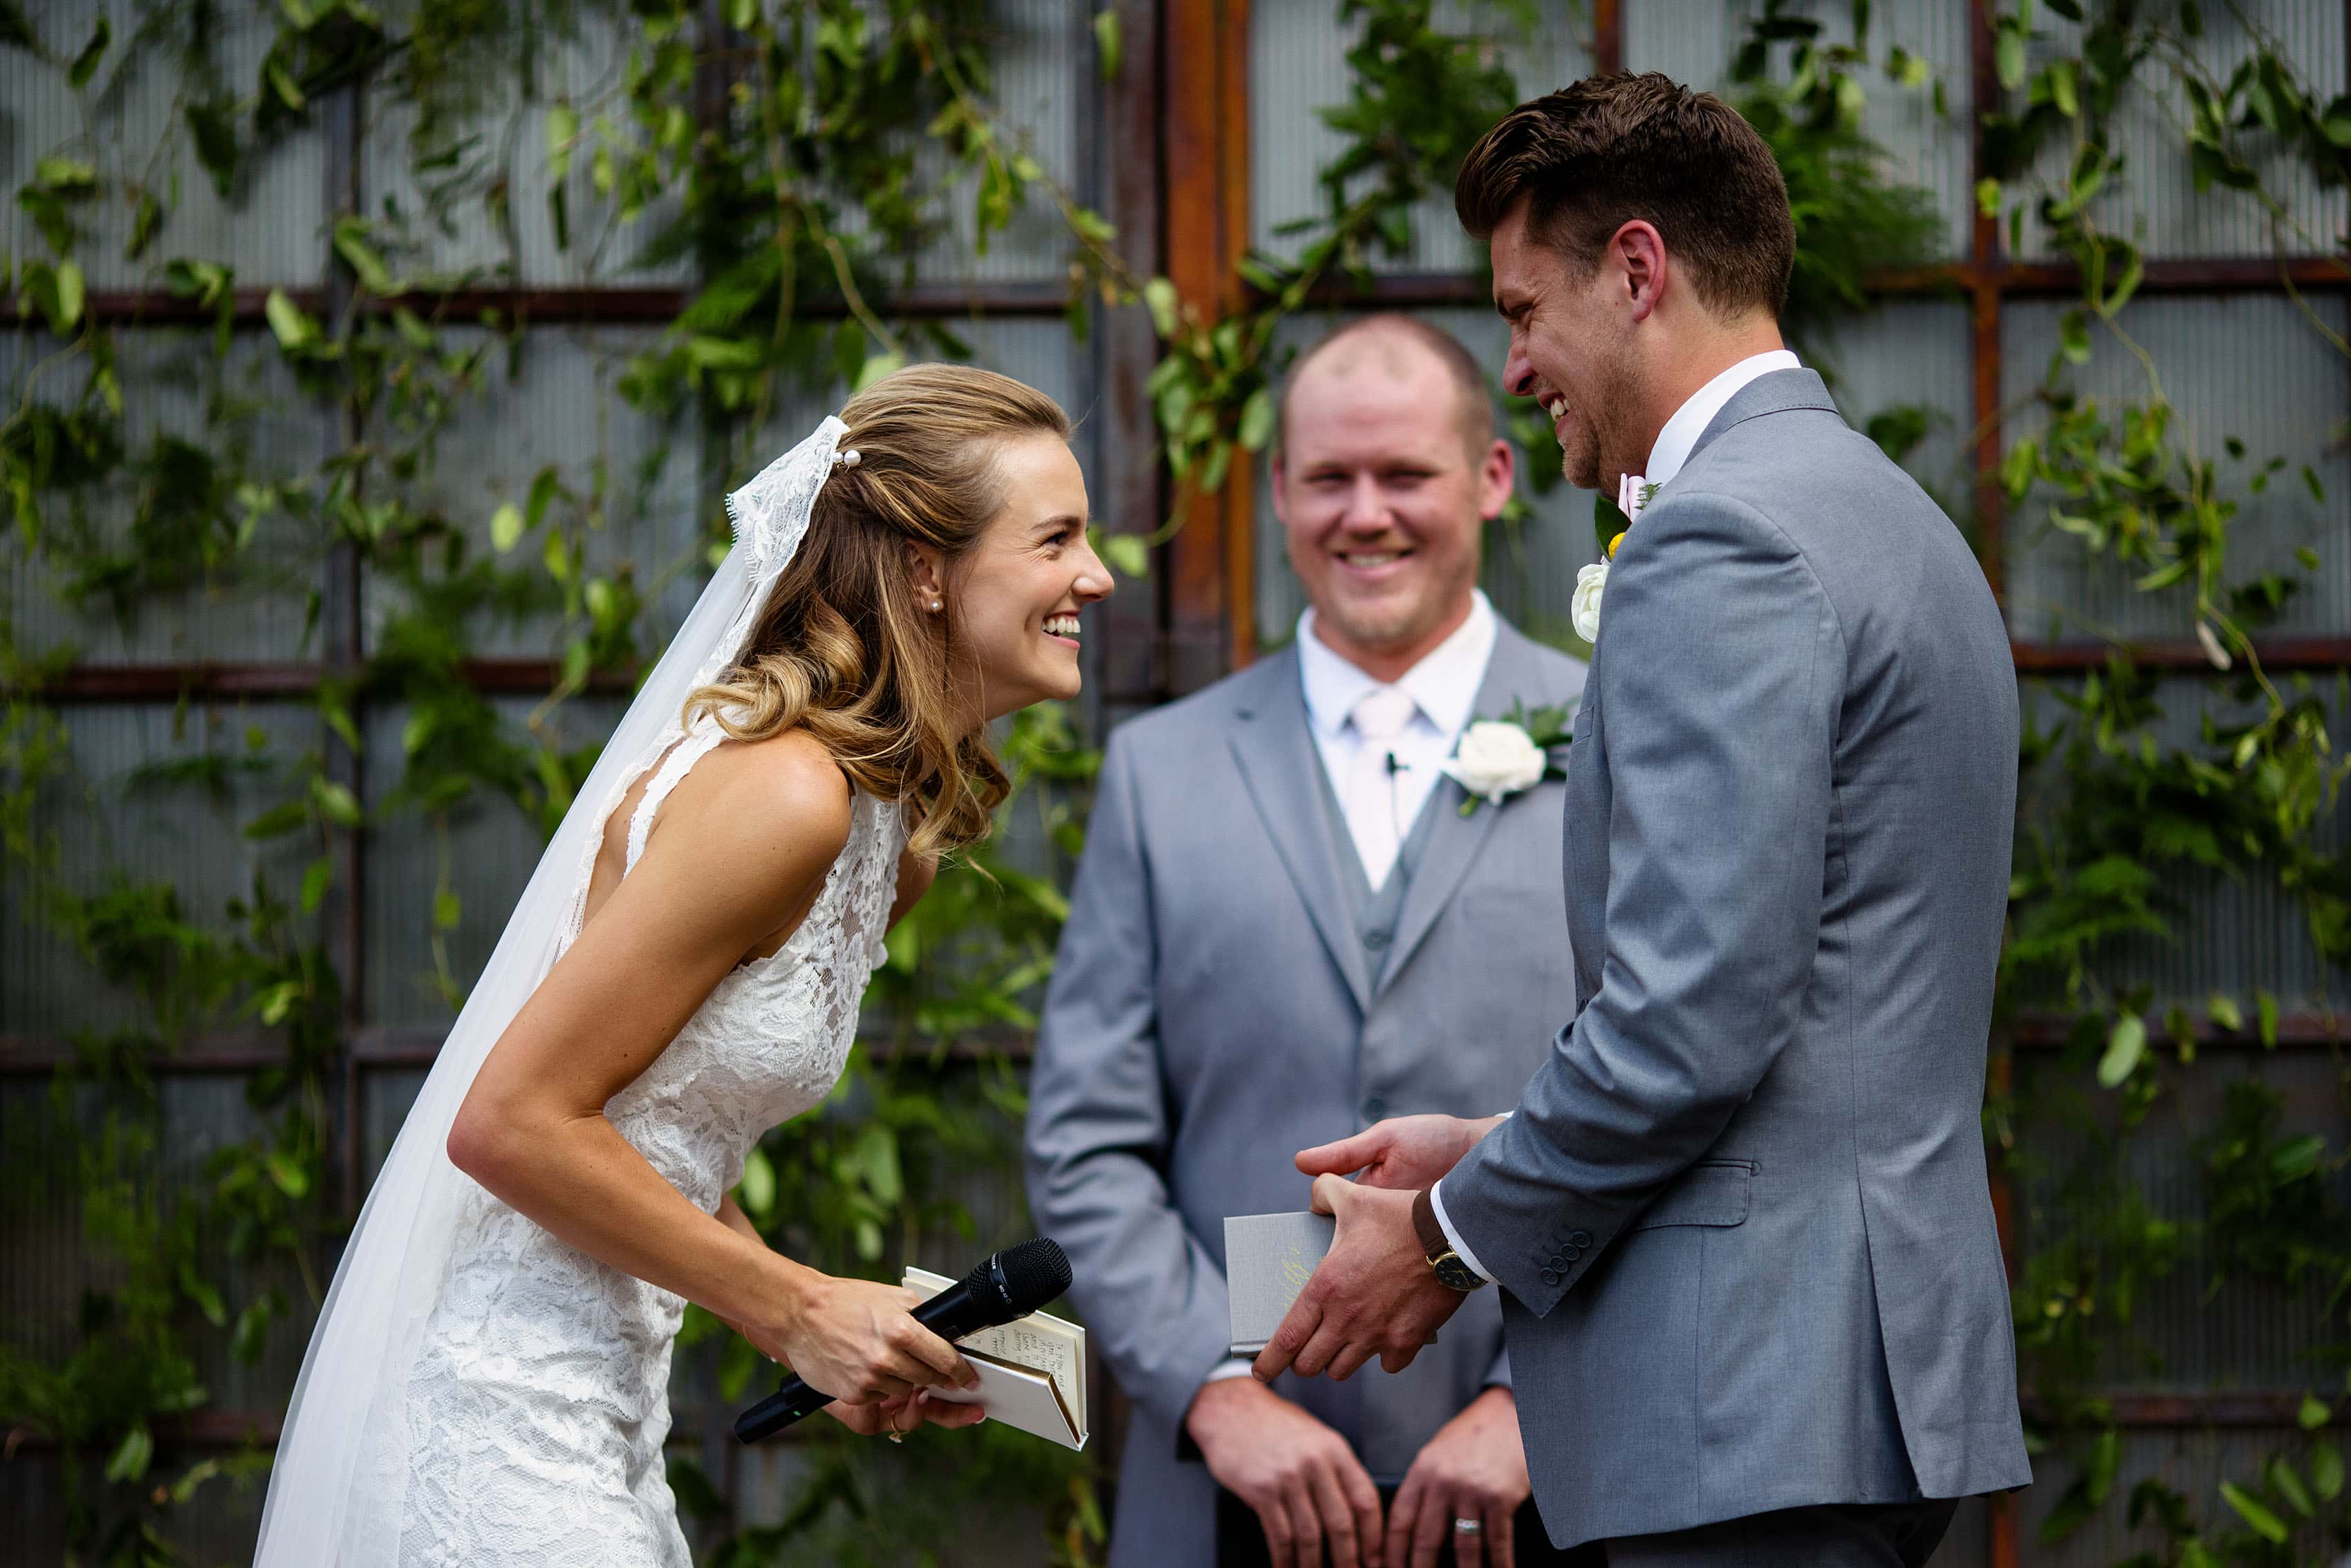 The bride and groom laugh together during their vows